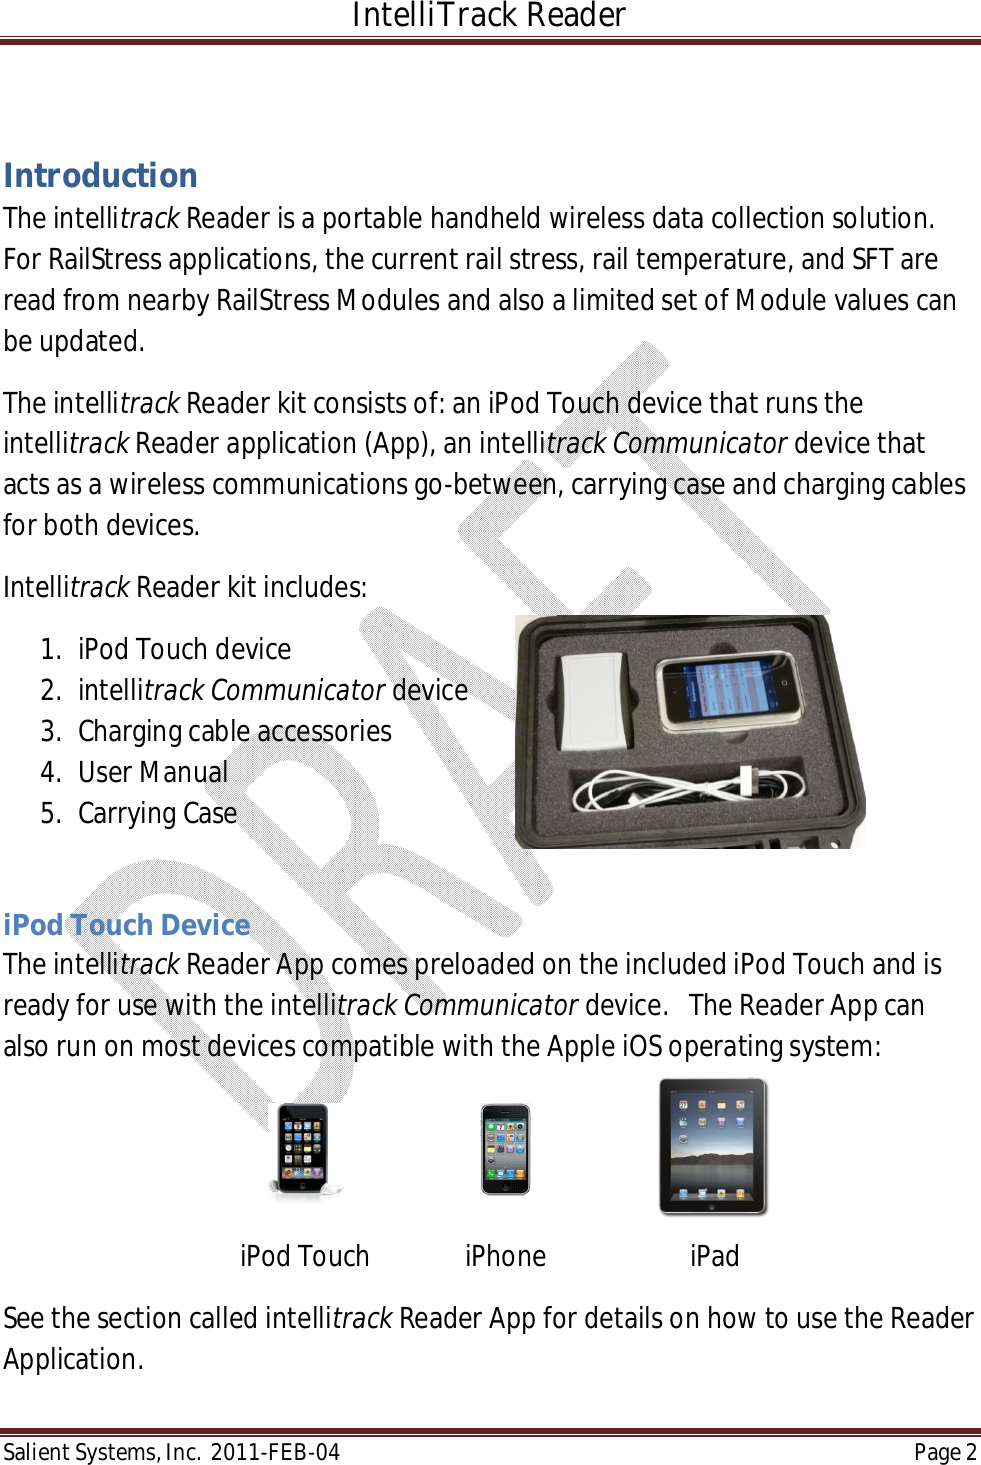 IntelliTrack Reader  Salient Systems, Inc.  2011-FEB-04 Page 2   Introduction The intellitrack Reader is a portable handheld wireless data collection solution.  For RailStress applications, the current rail stress, rail temperature, and SFT are read from nearby RailStress Modules and also a limited set of Module values can be updated.  The intellitrack Reader kit consists of: an iPod Touch device that runs the intellitrack Reader application (App), an intellitrack Communicator device that acts as a wireless communications go-between, carrying case and charging cables for both devices.  Intellitrack Reader kit includes: 1. iPod Touch device 2. intellitrack Communicator device 3. Charging cable accessories 4. User Manual 5. Carrying Case  iPod Touch Device The intellitrack Reader App comes preloaded on the included iPod Touch and is ready for use with the intellitrack Communicator device.   The Reader App can also run on most devices compatible with the Apple iOS operating system:    iPod Touch    iPhone    iPad See the section called intellitrack Reader App for details on how to use the Reader Application.